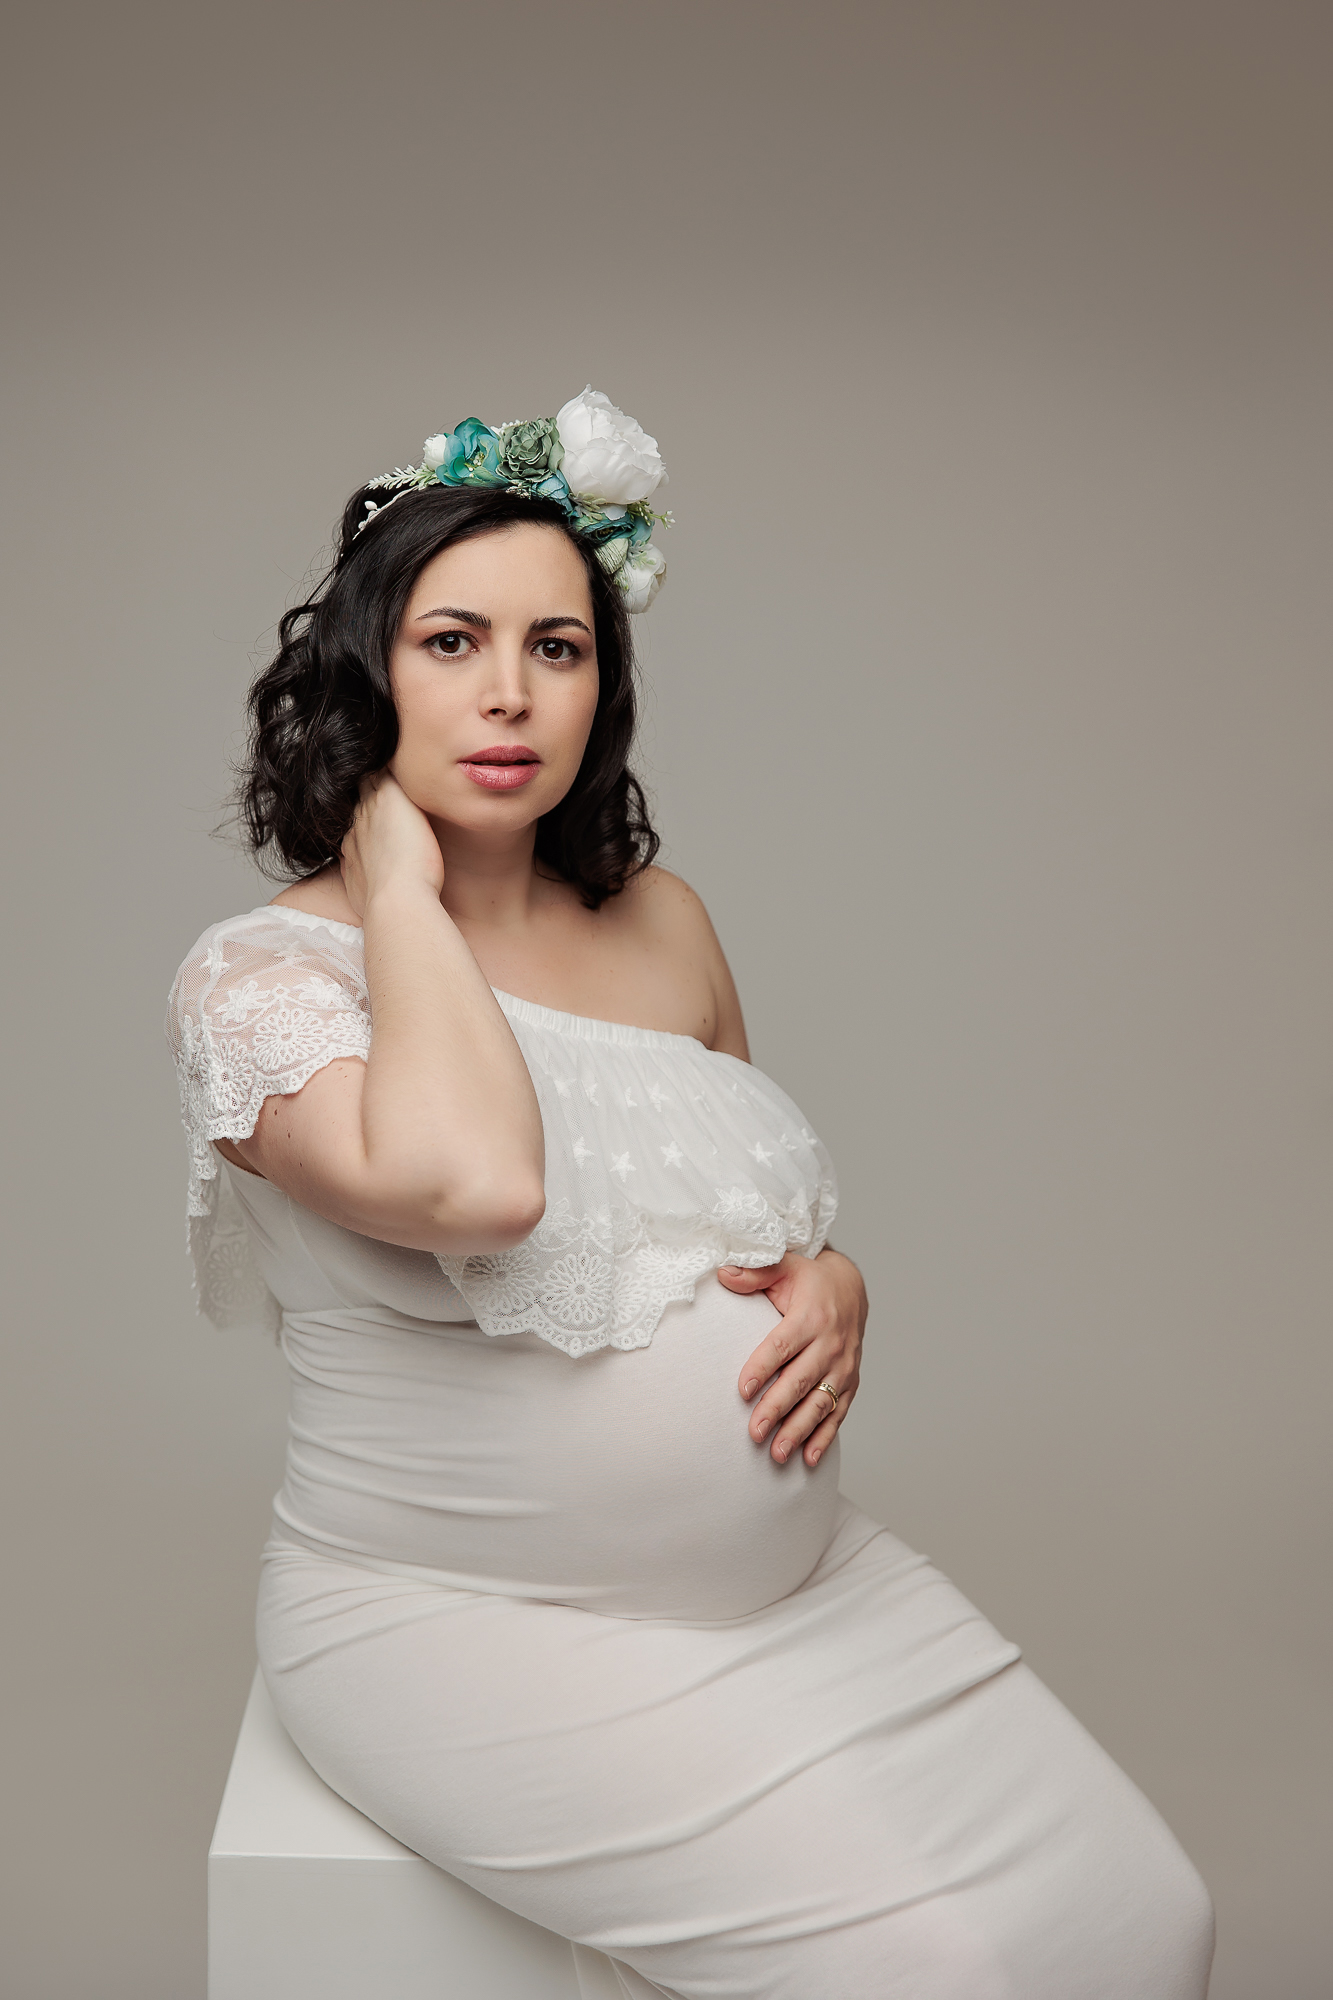 Pregnant woman wearing a flower crown during a maternity photo session in Calgary